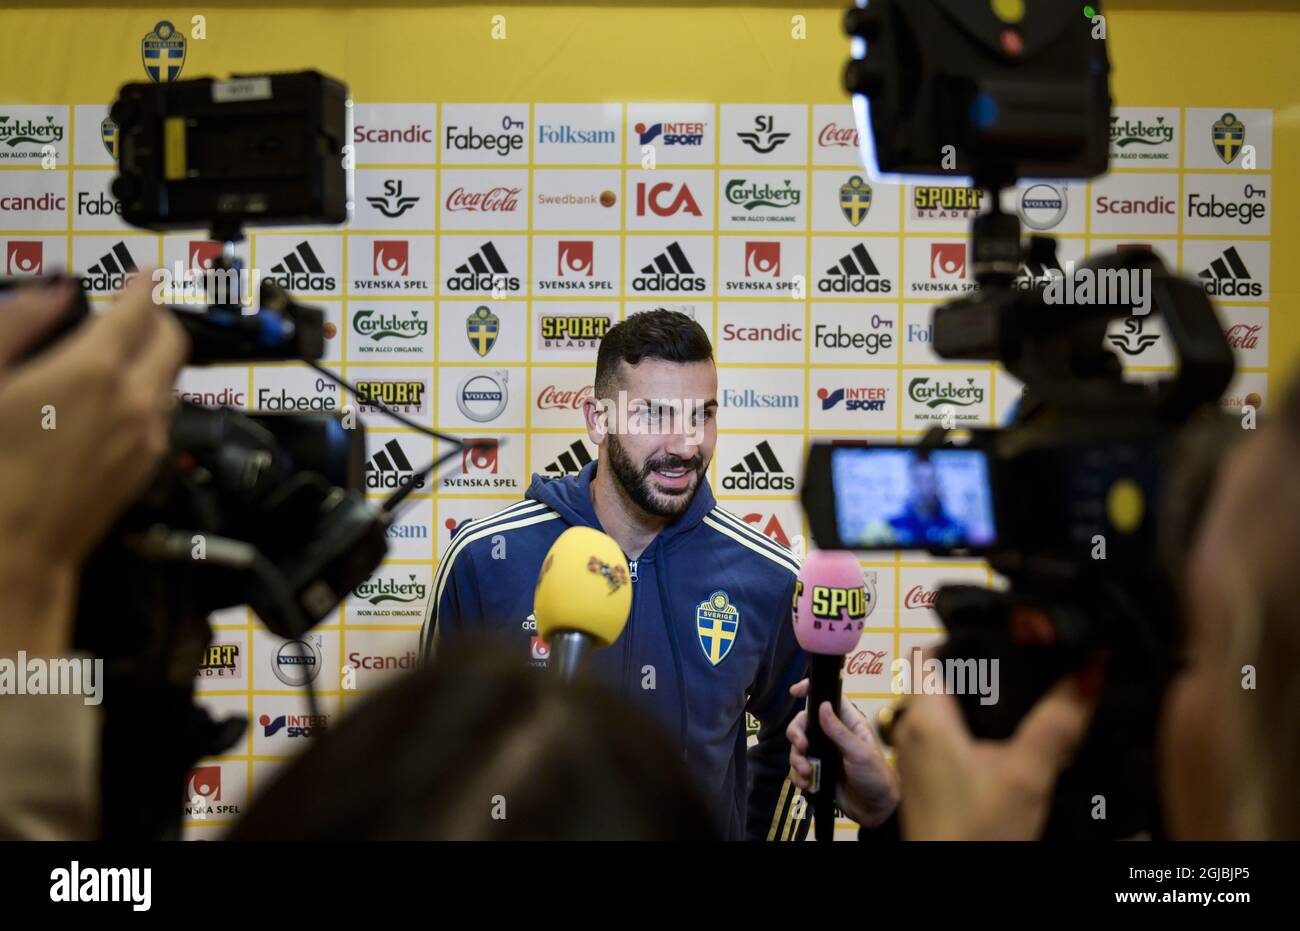 STOCKHOLM 20181008 Sweden' national soccer team player Michael Ishak talks  to journalist after a training session at Friends Arena in Solna in Oct.  08, 2018, ahead of a Nations League-match against Russia.